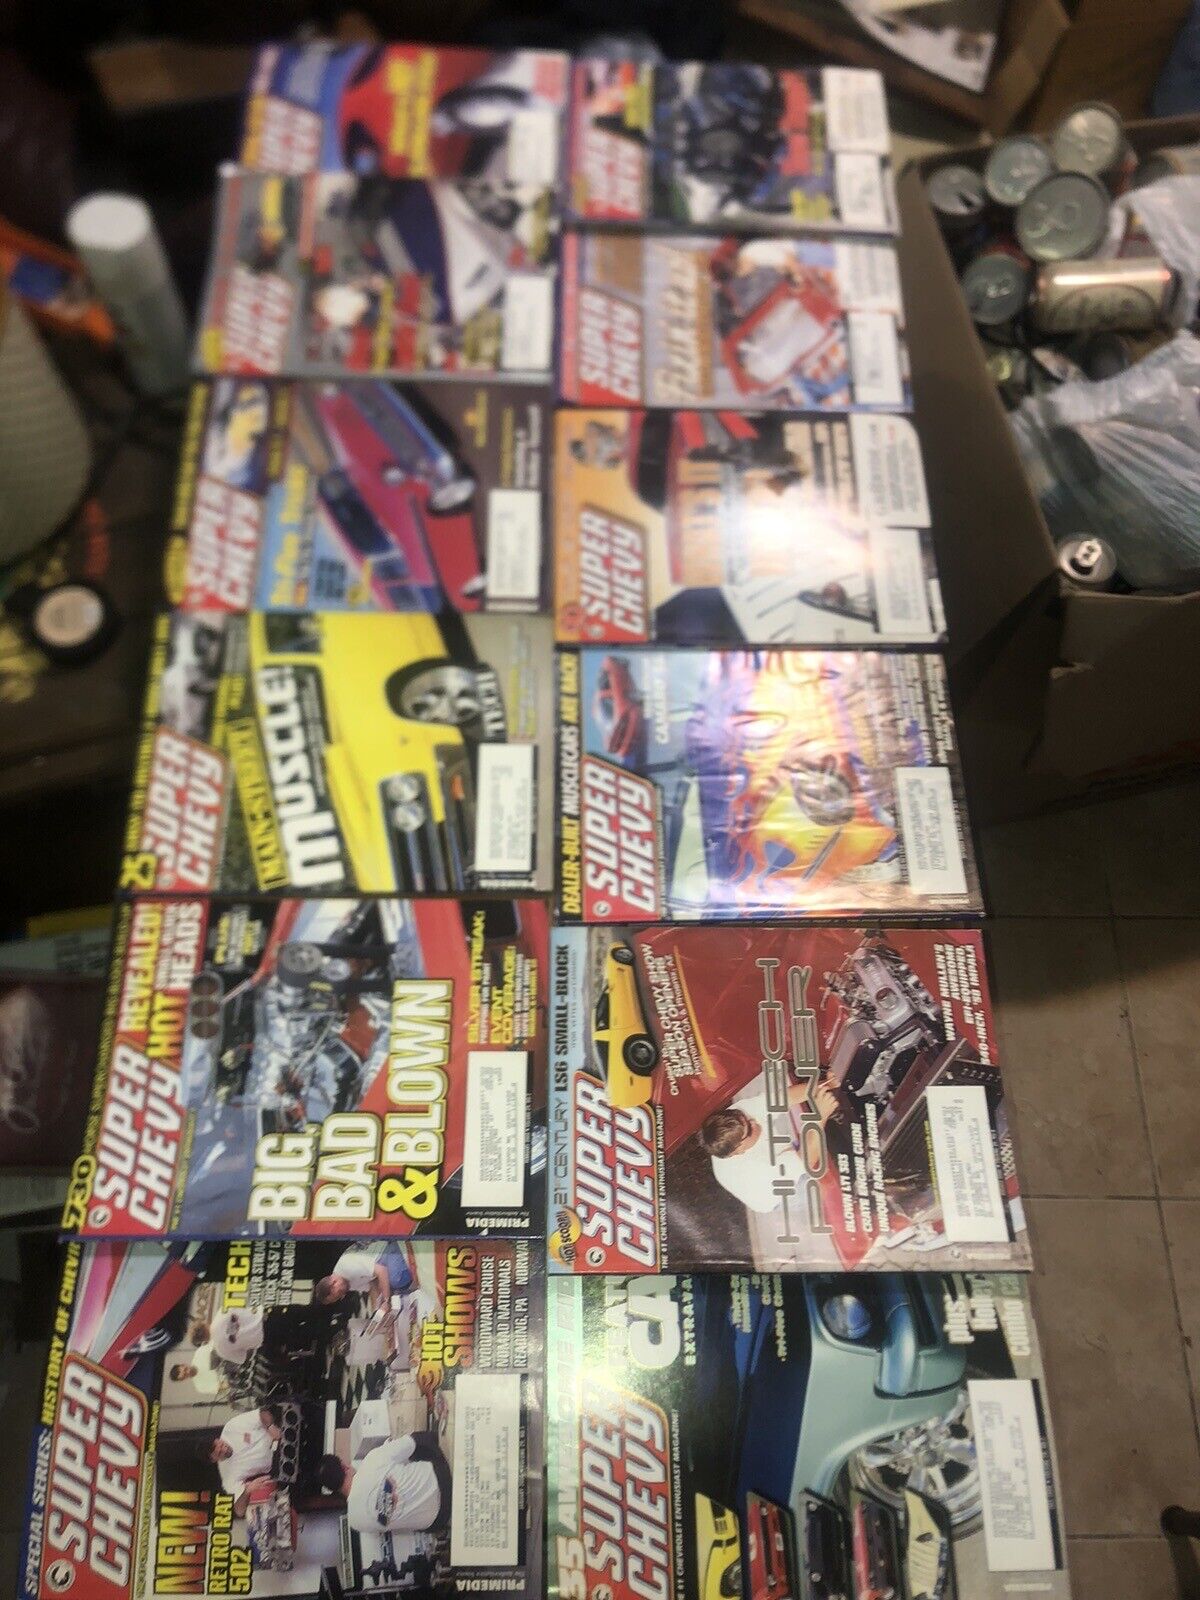 super chevy magazine lot(12) Full Year 2000 Volume 29 No. 1-12. Cars Antique